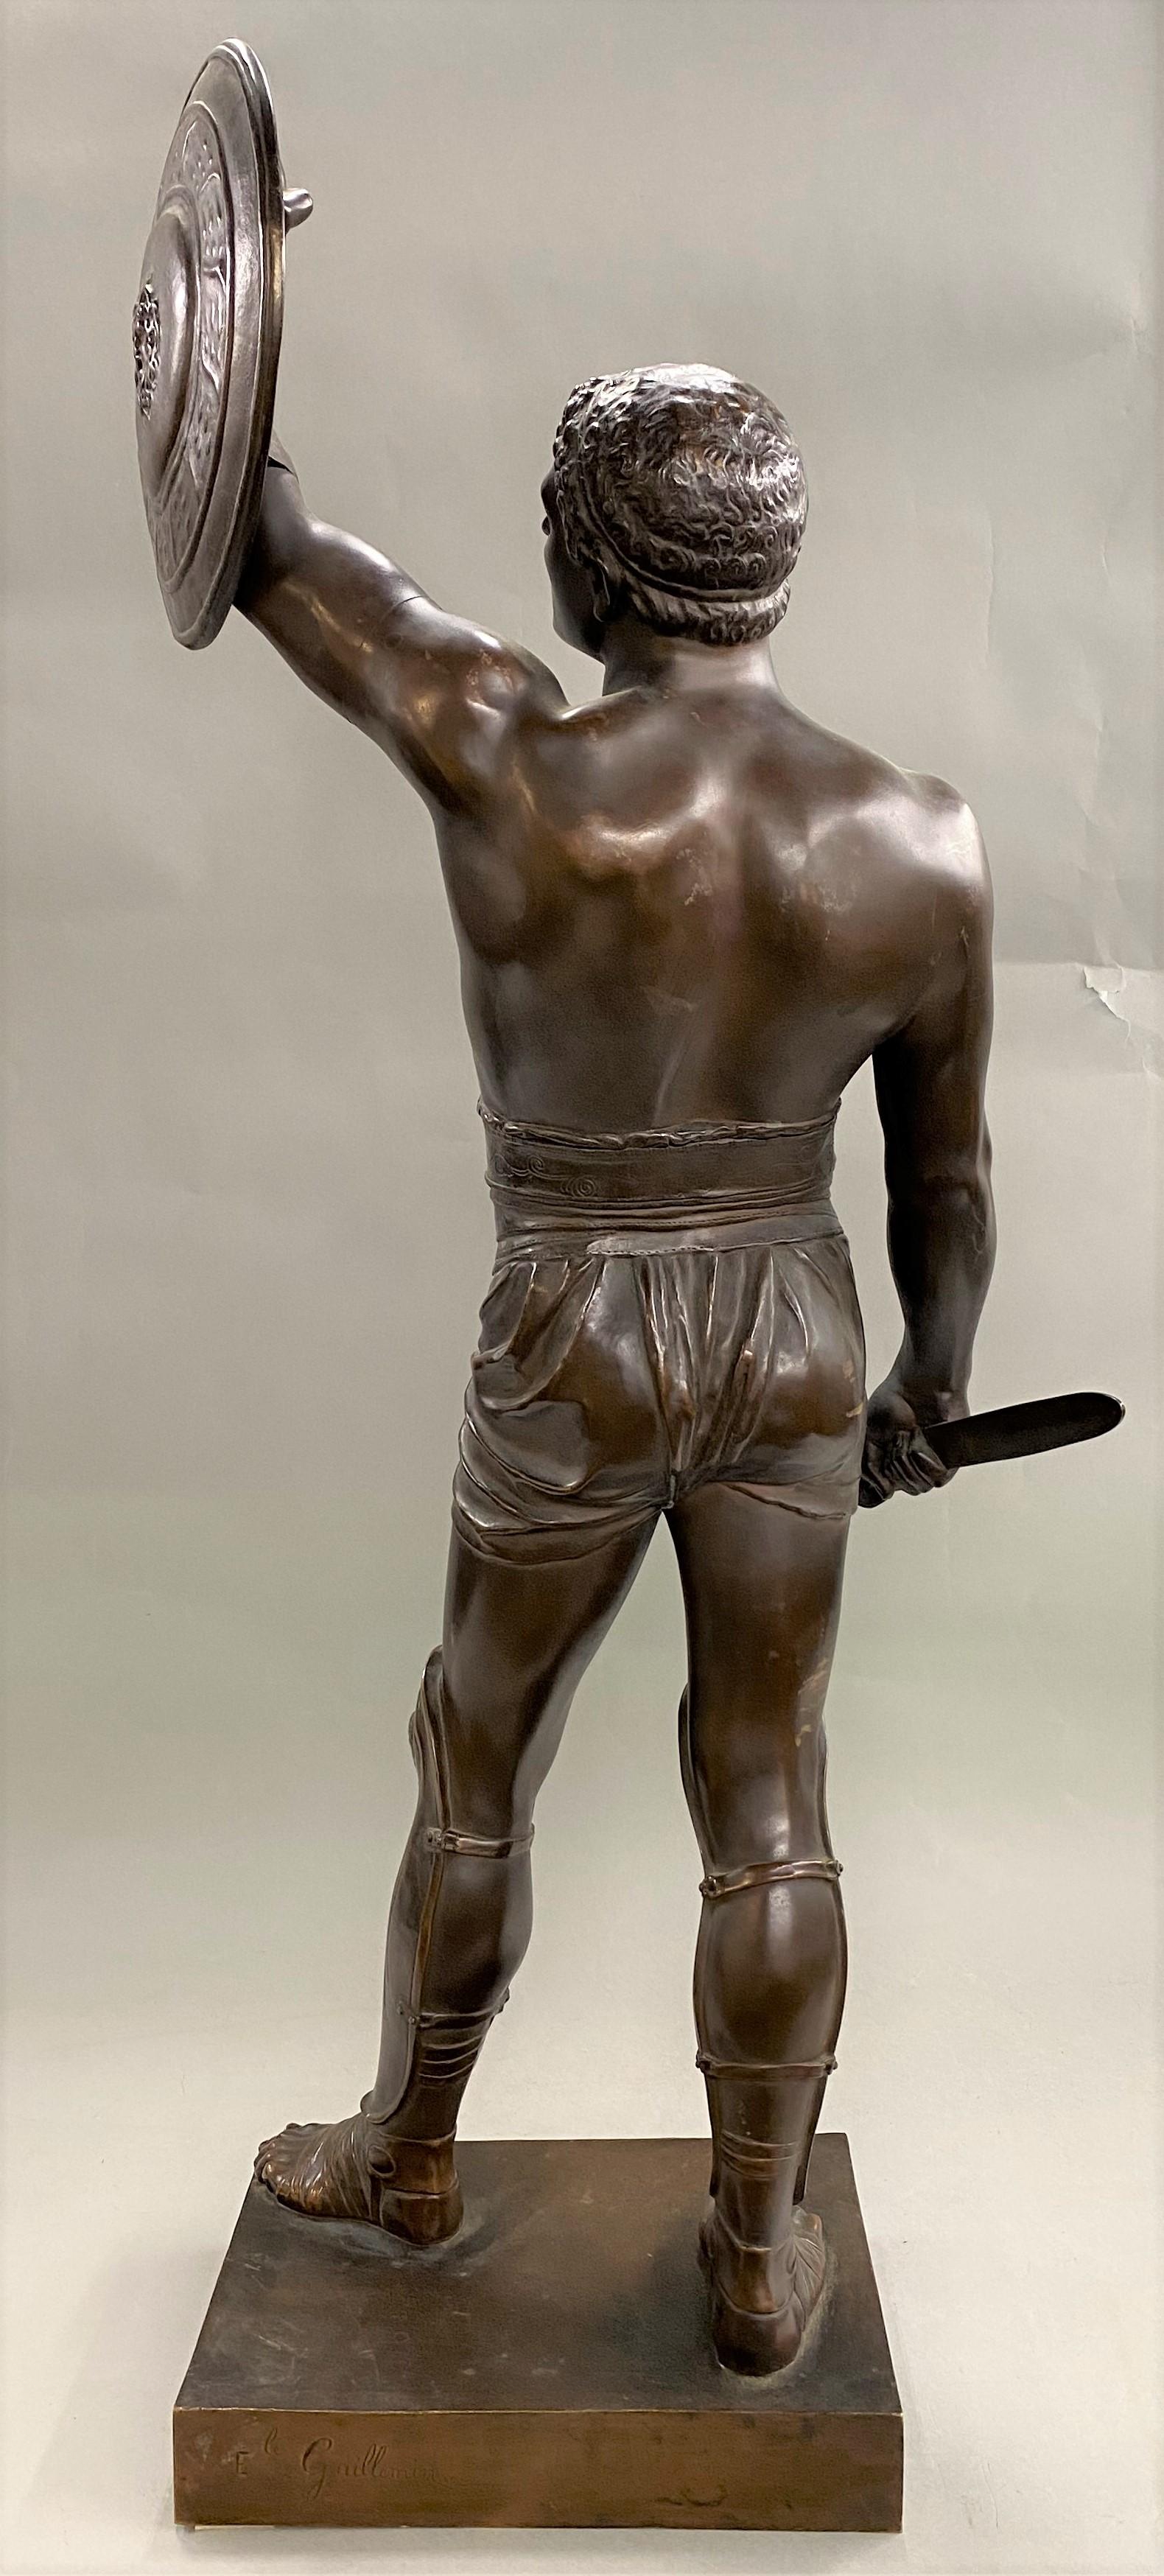 A fine patinated bronze figure of Roman gladiator Retiarius by French sculptor Emile Coriolan Hippolyte Guillemin (1841-1907). Guillemin was born in Paris, France, son of the painter Emile Marie Auguste Guillemin and studied under him and under